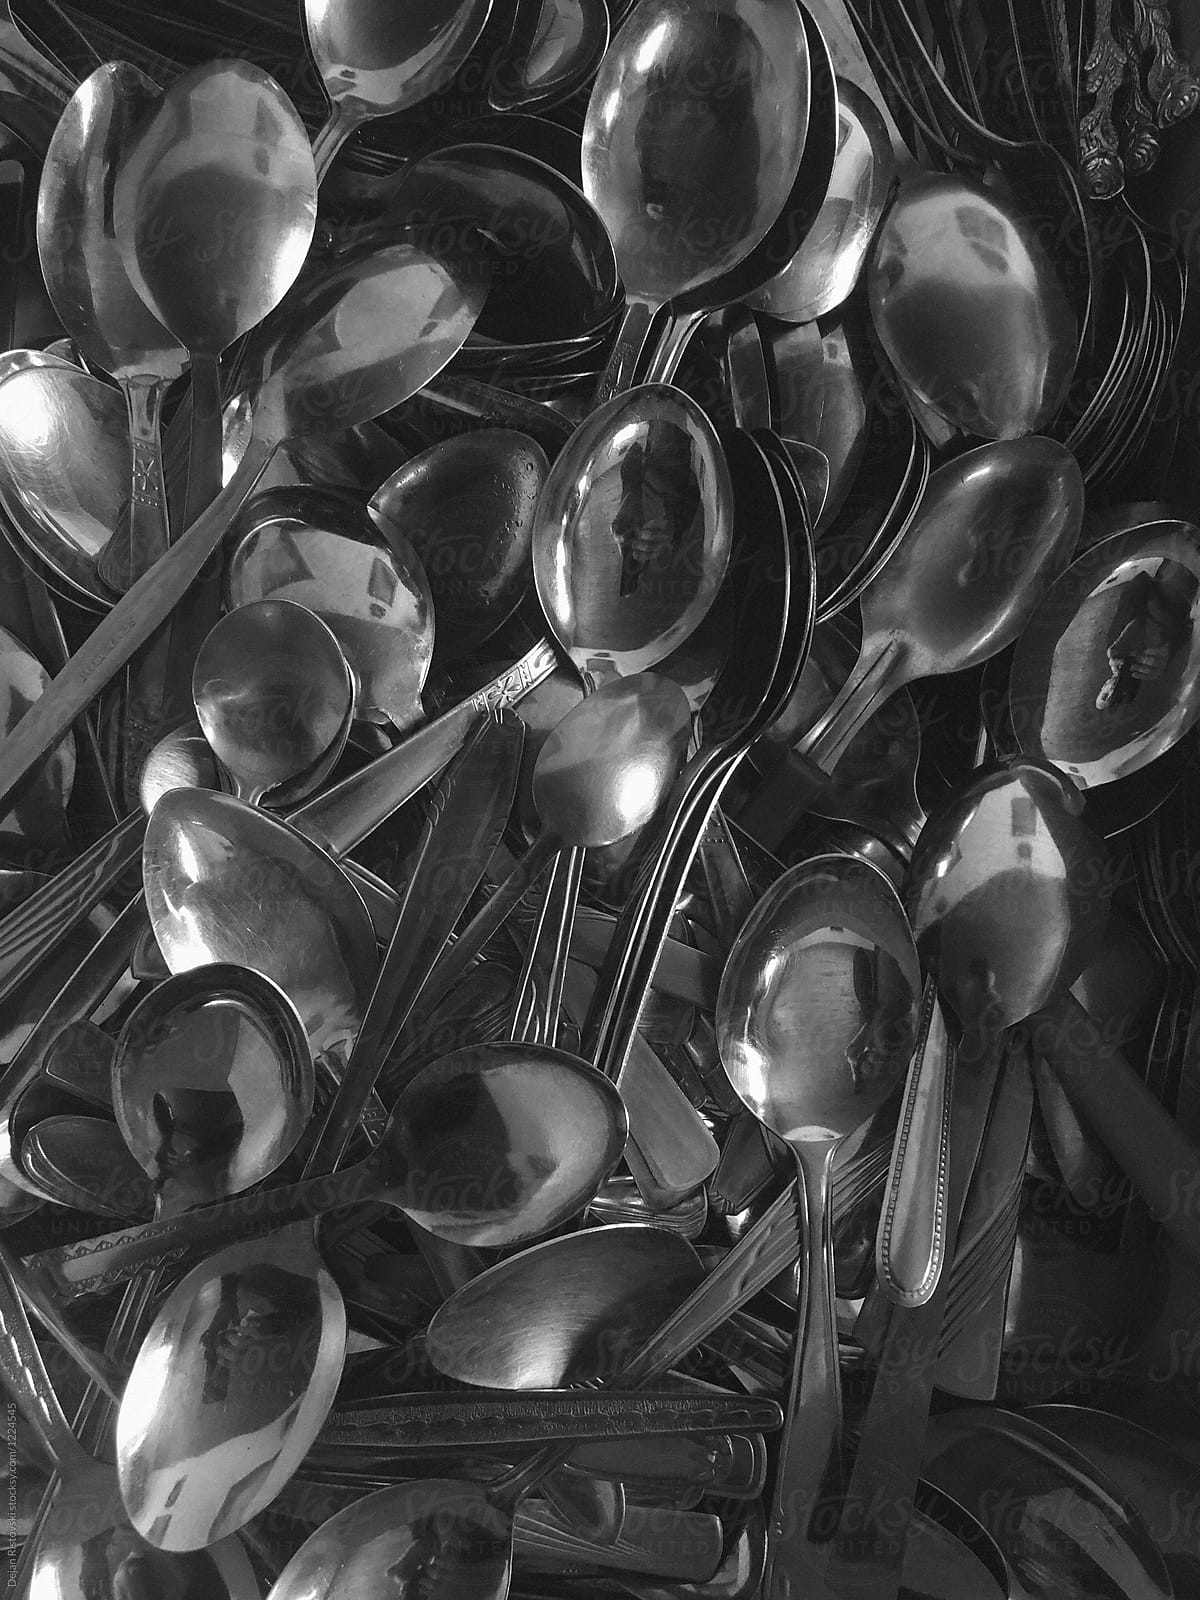 A bunch of spoons in a drawer.